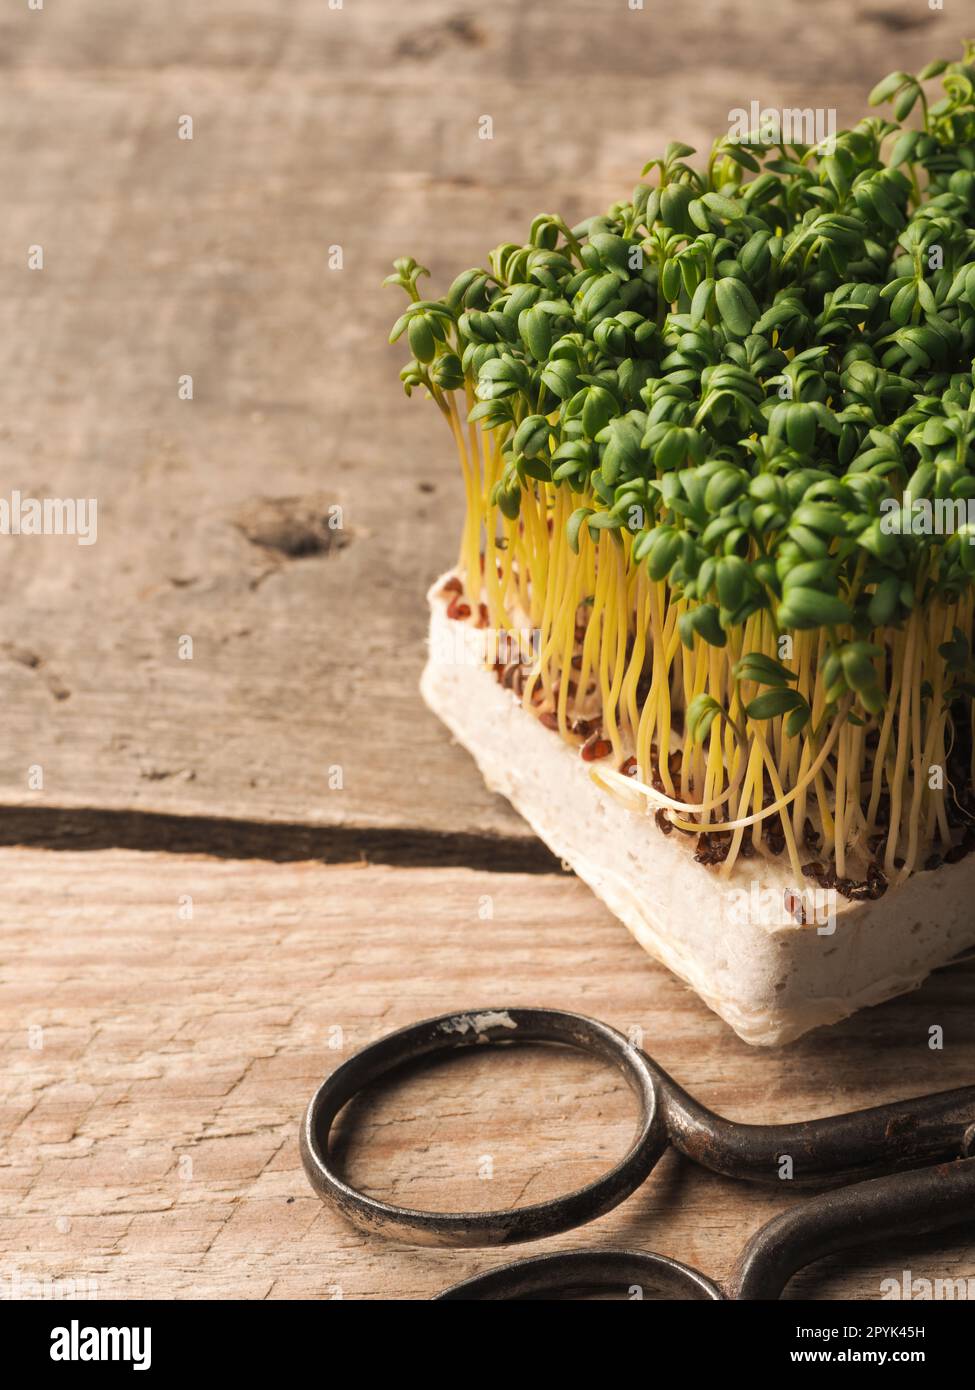 Fresh organic cress with kitchen scissors on a rustic kitchen table Stock Photo